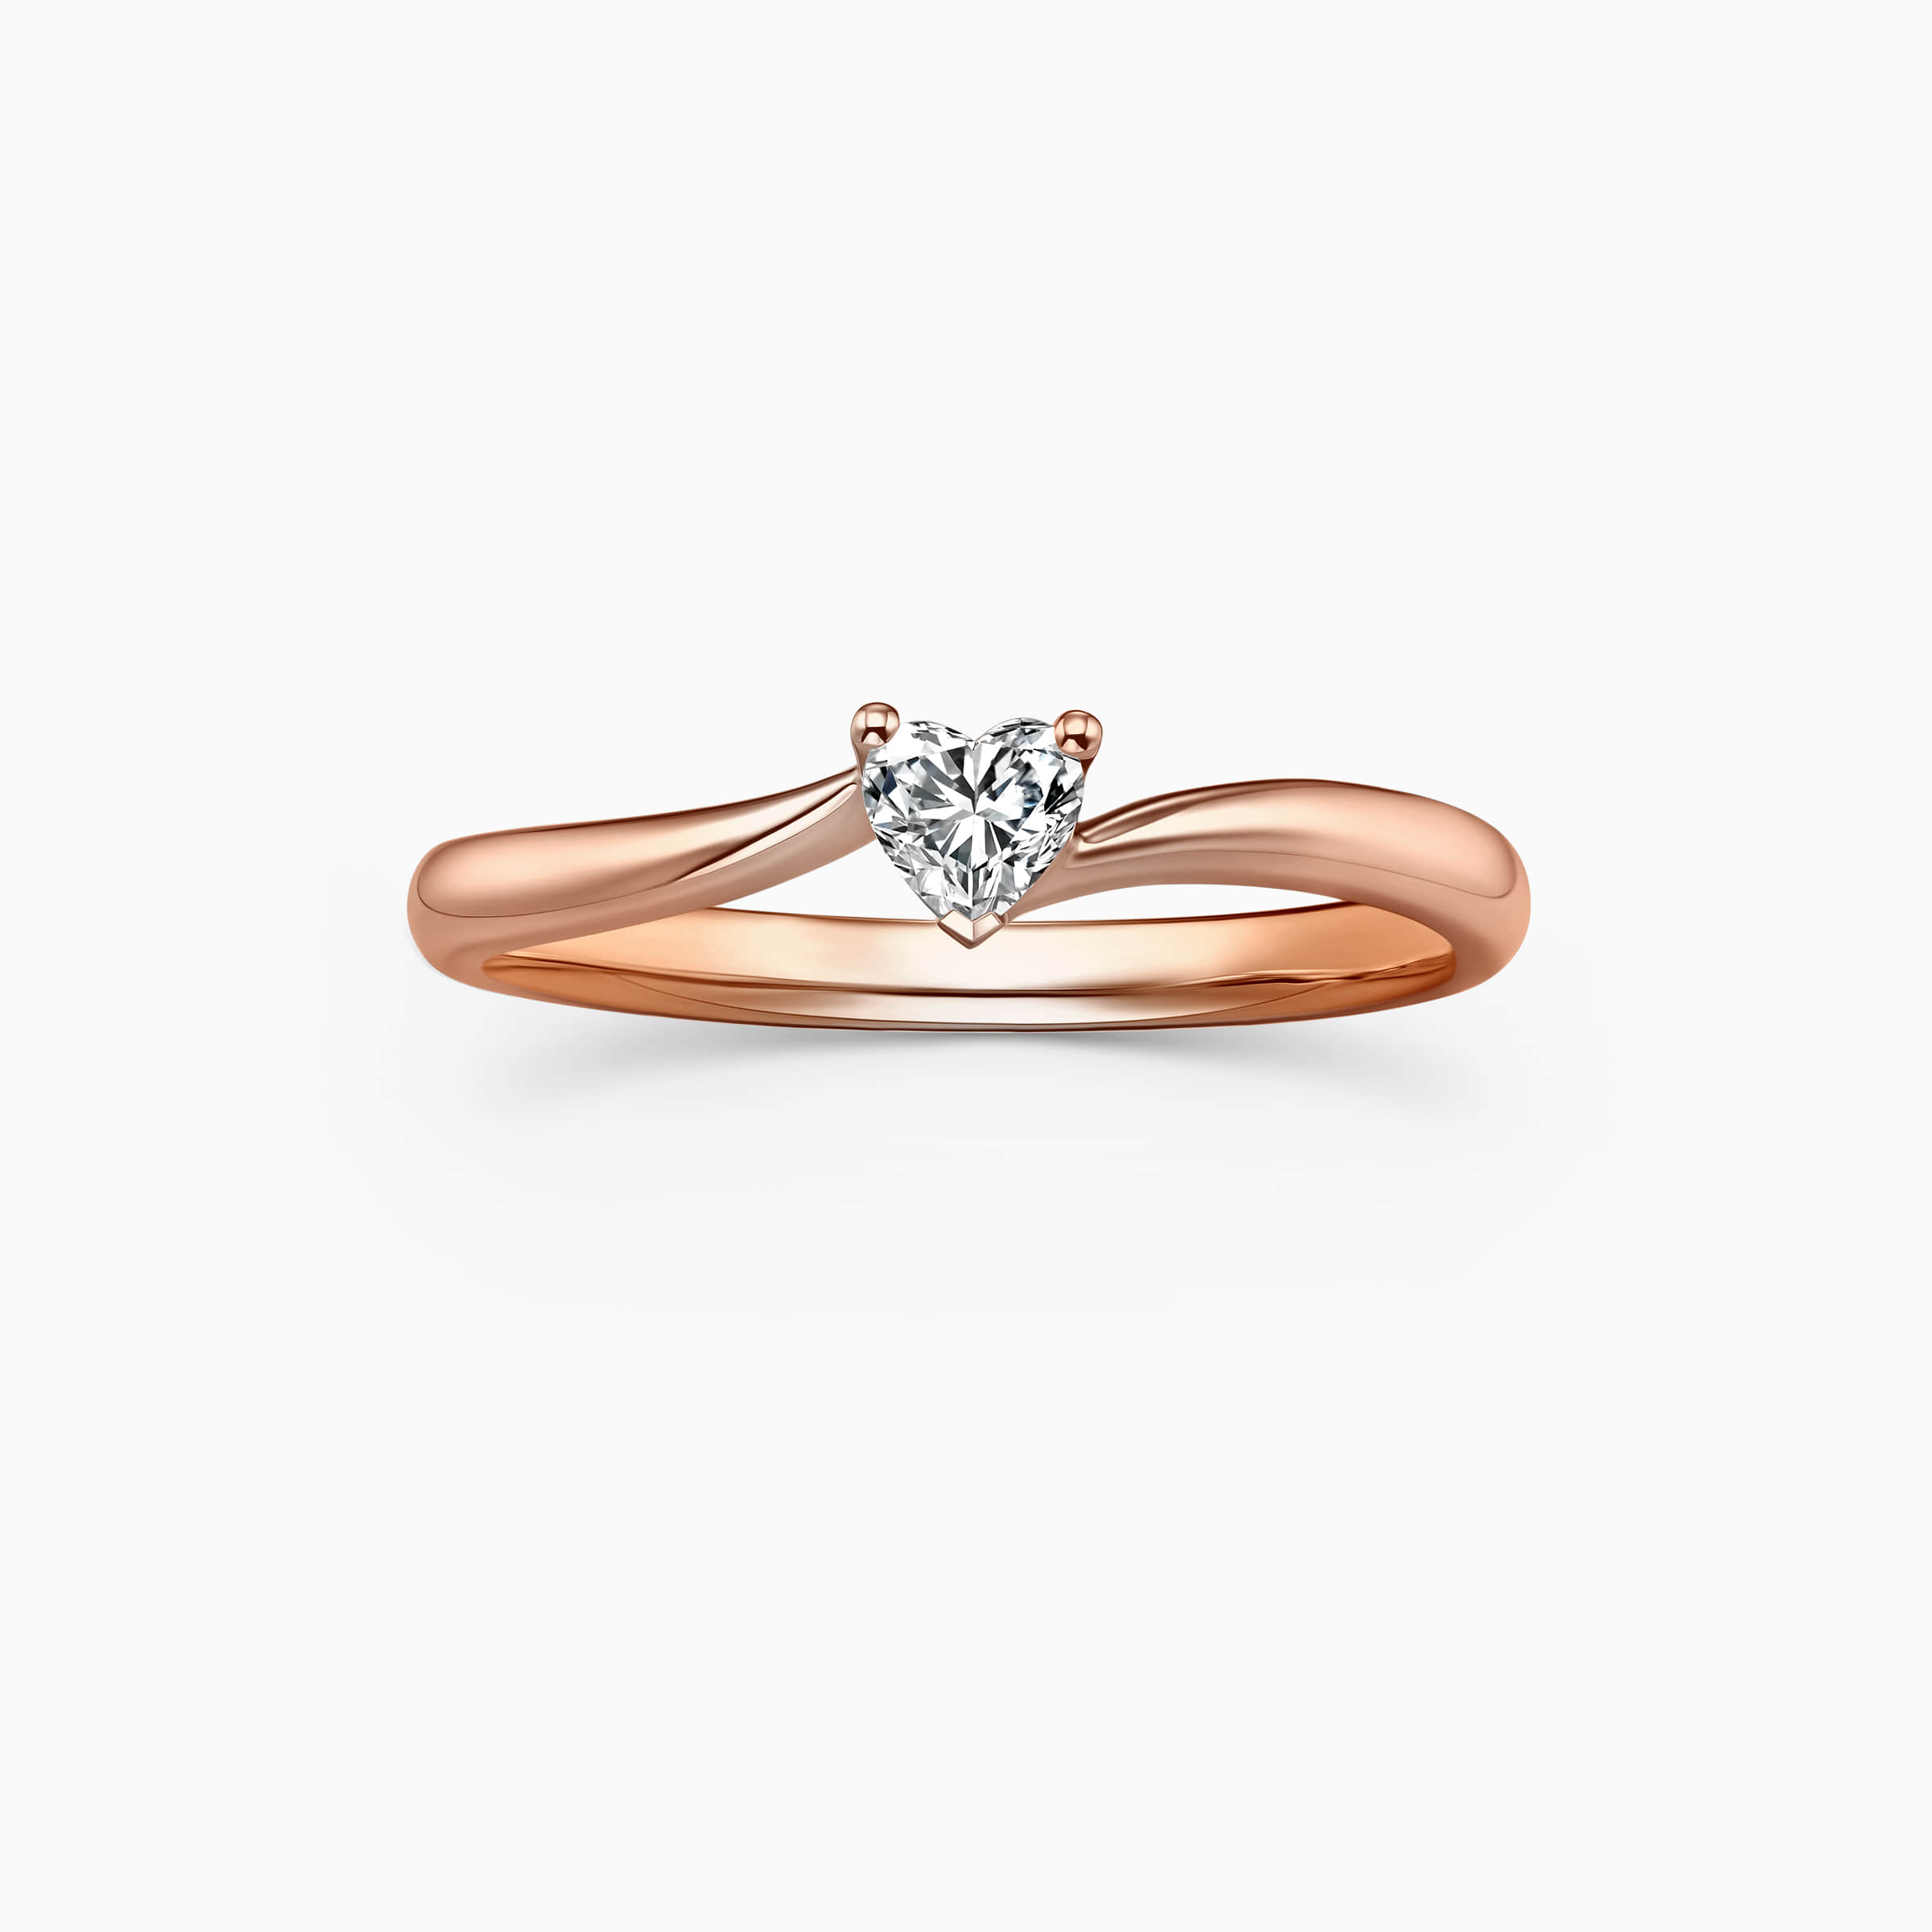 Darry Ring heart solitaire promise ring rose gold